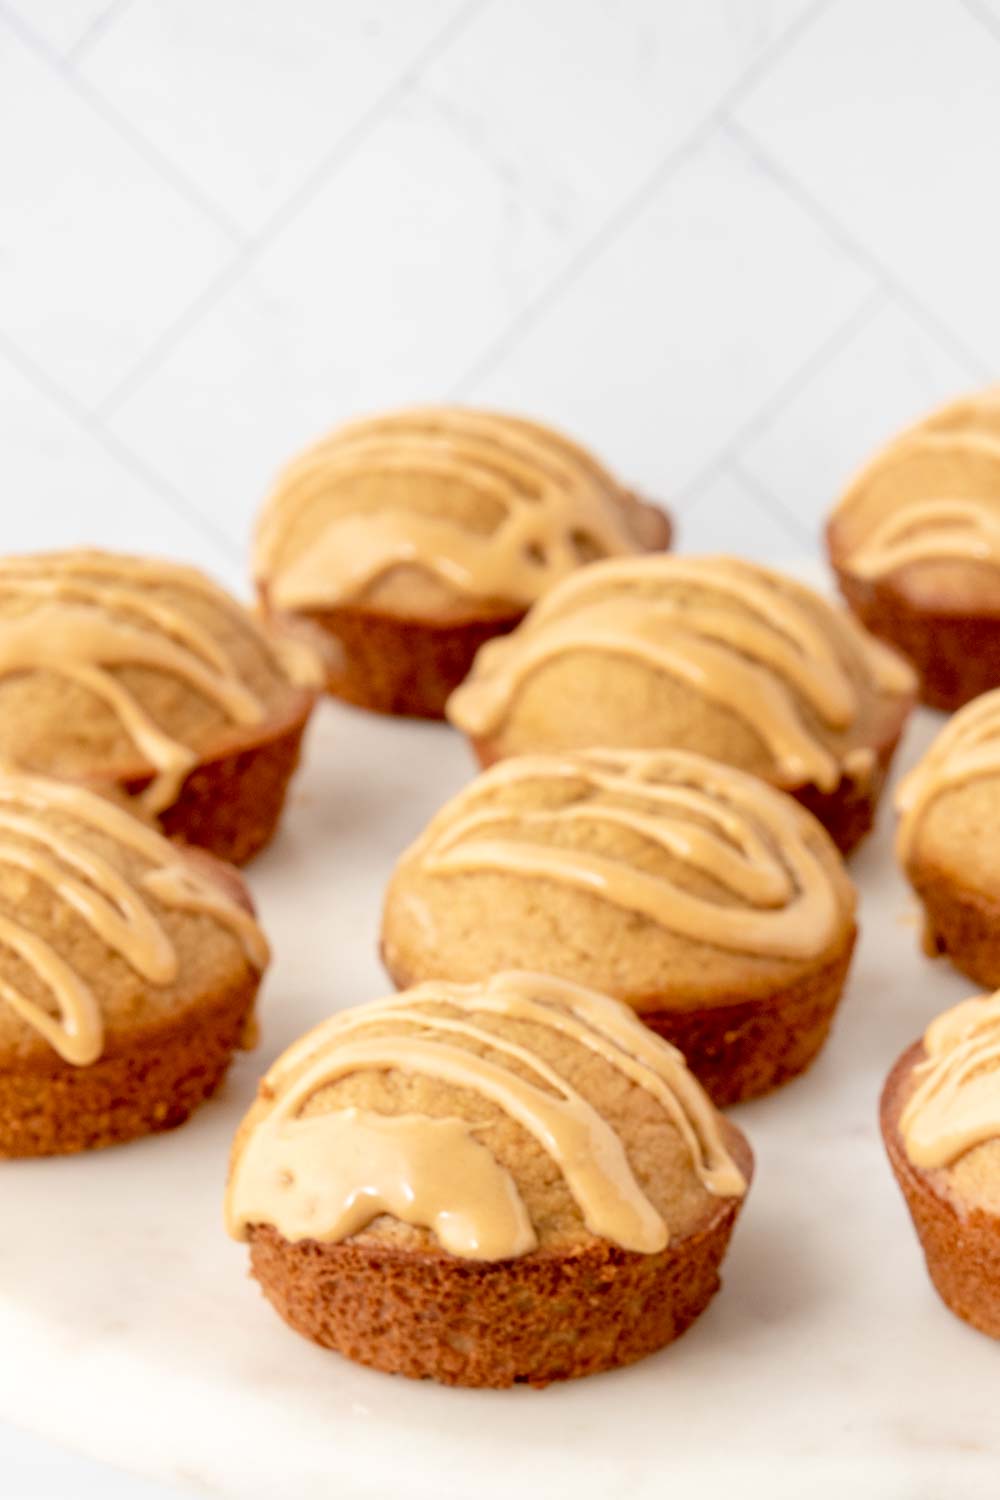 Homemade peanut butter cupcakes for dogs on a marble surface.